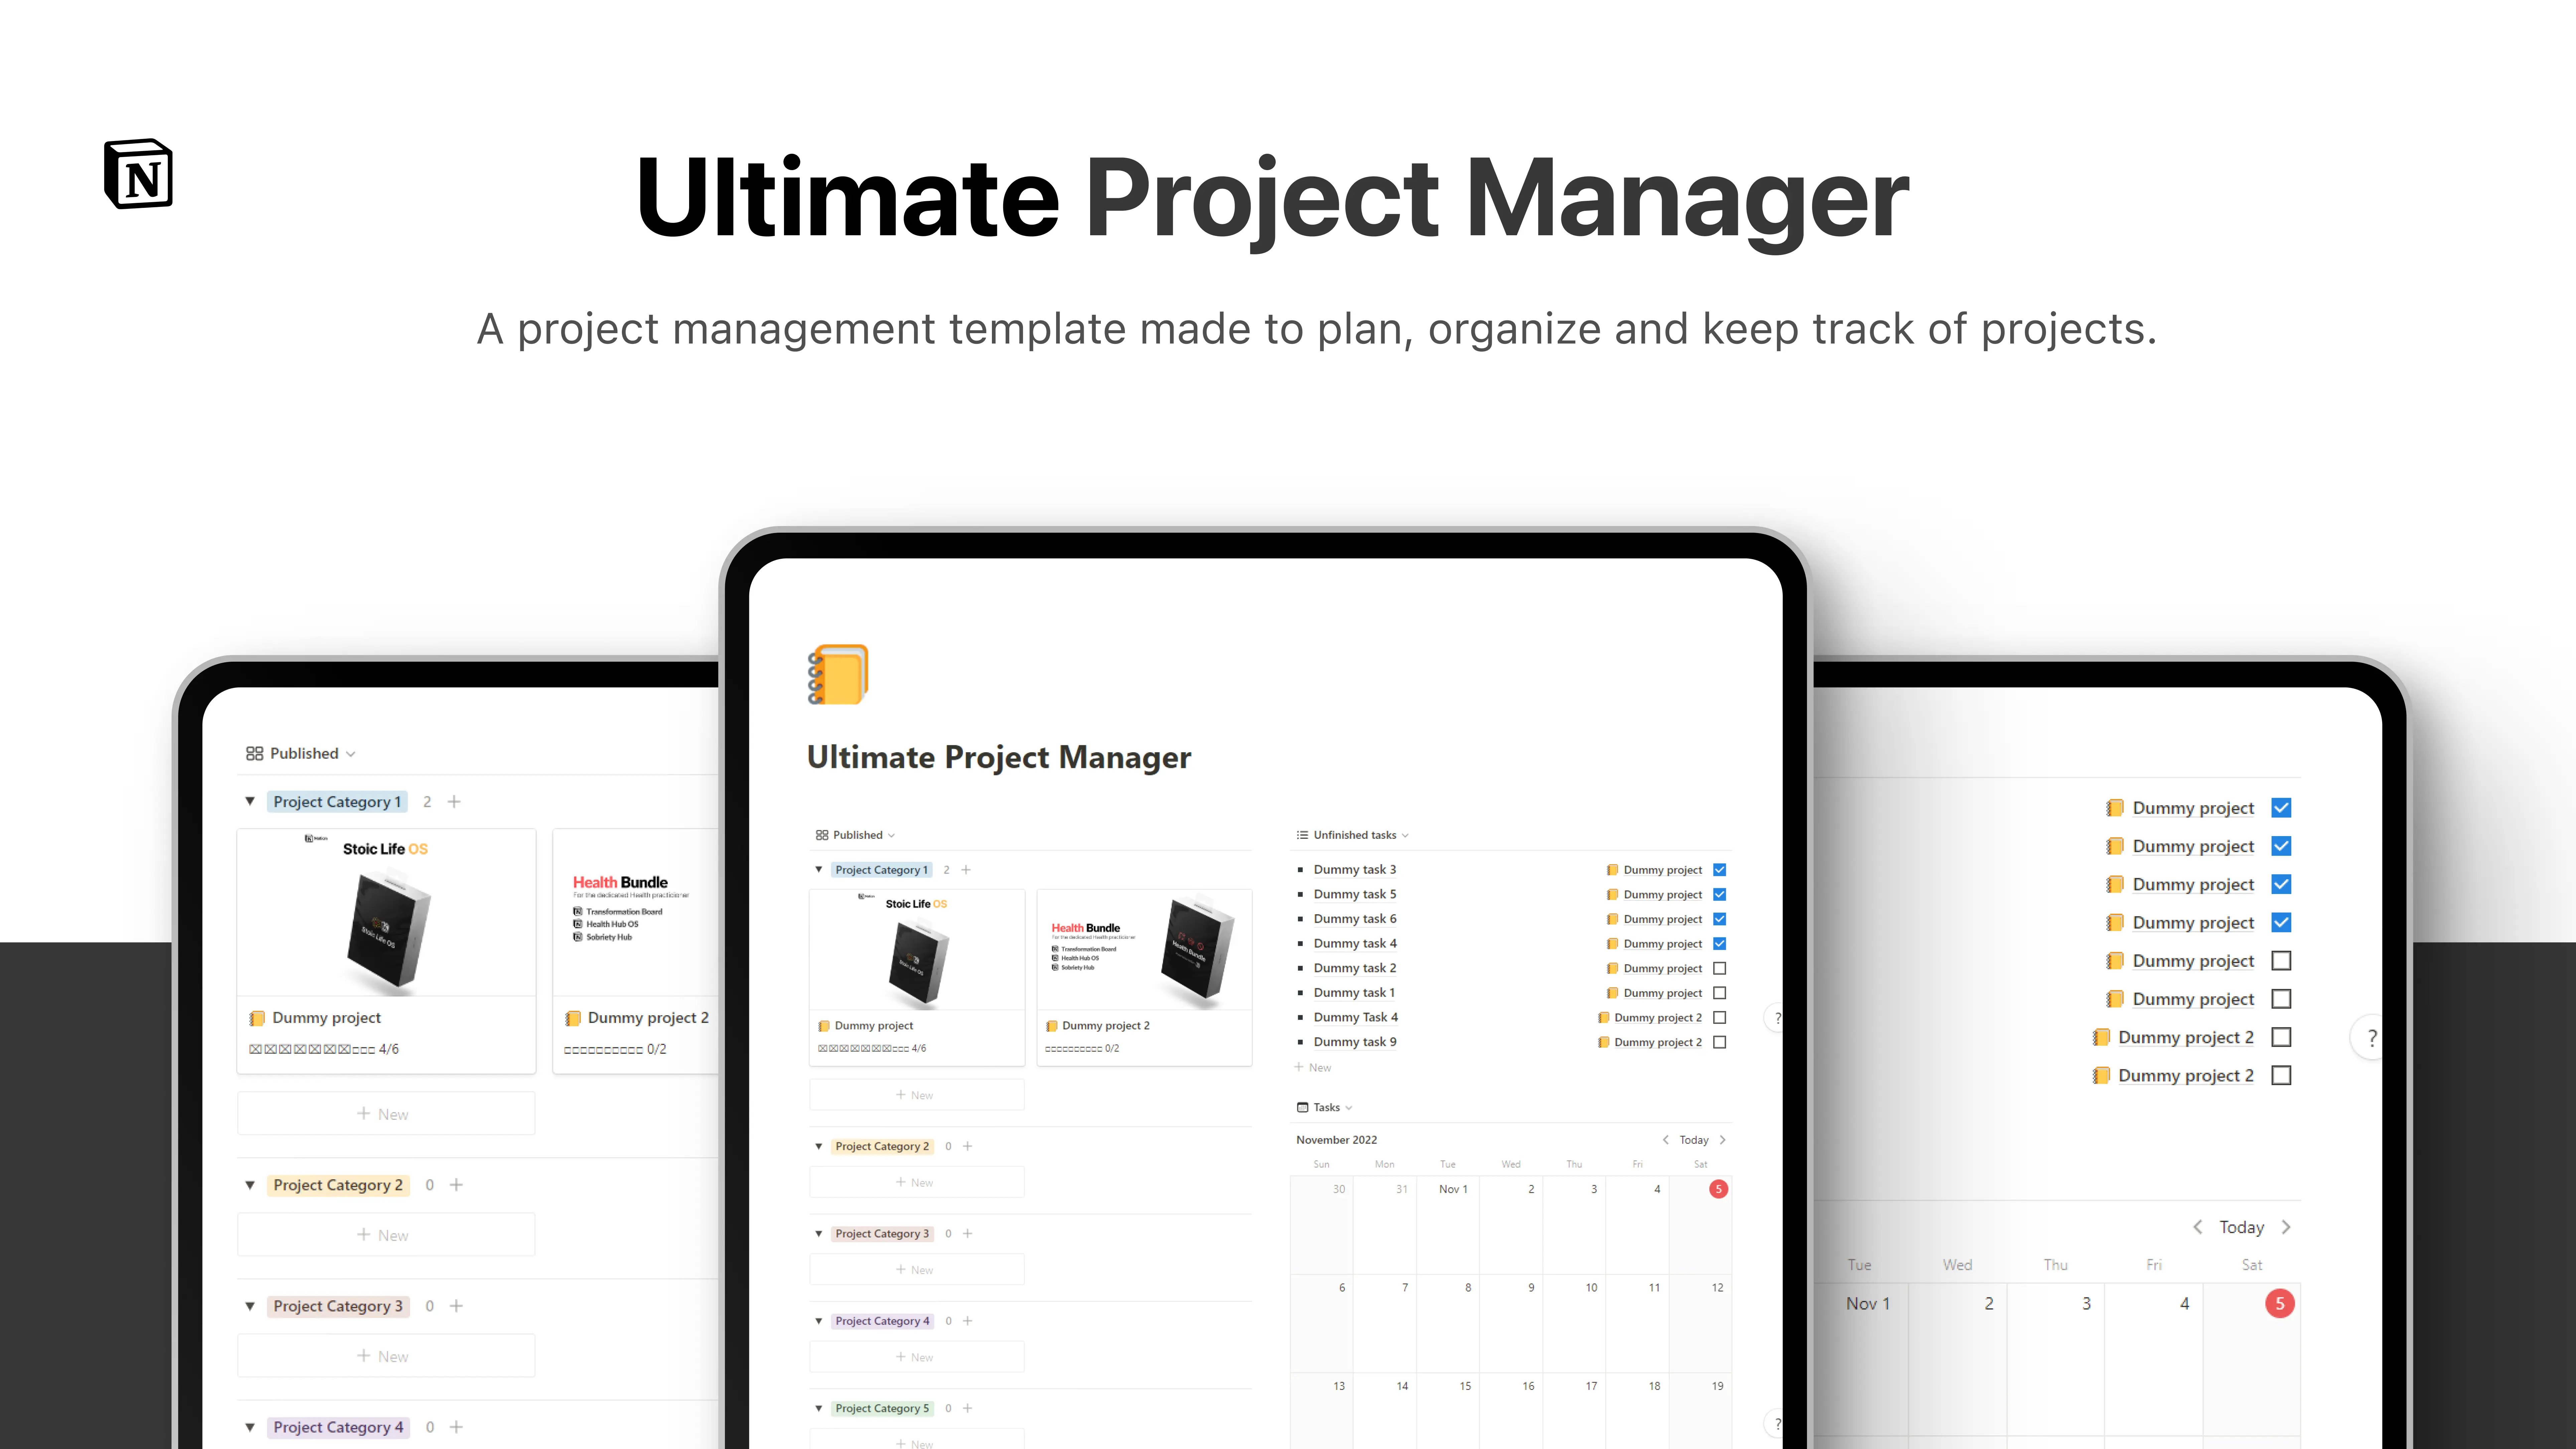 Ultimate Project Manager image